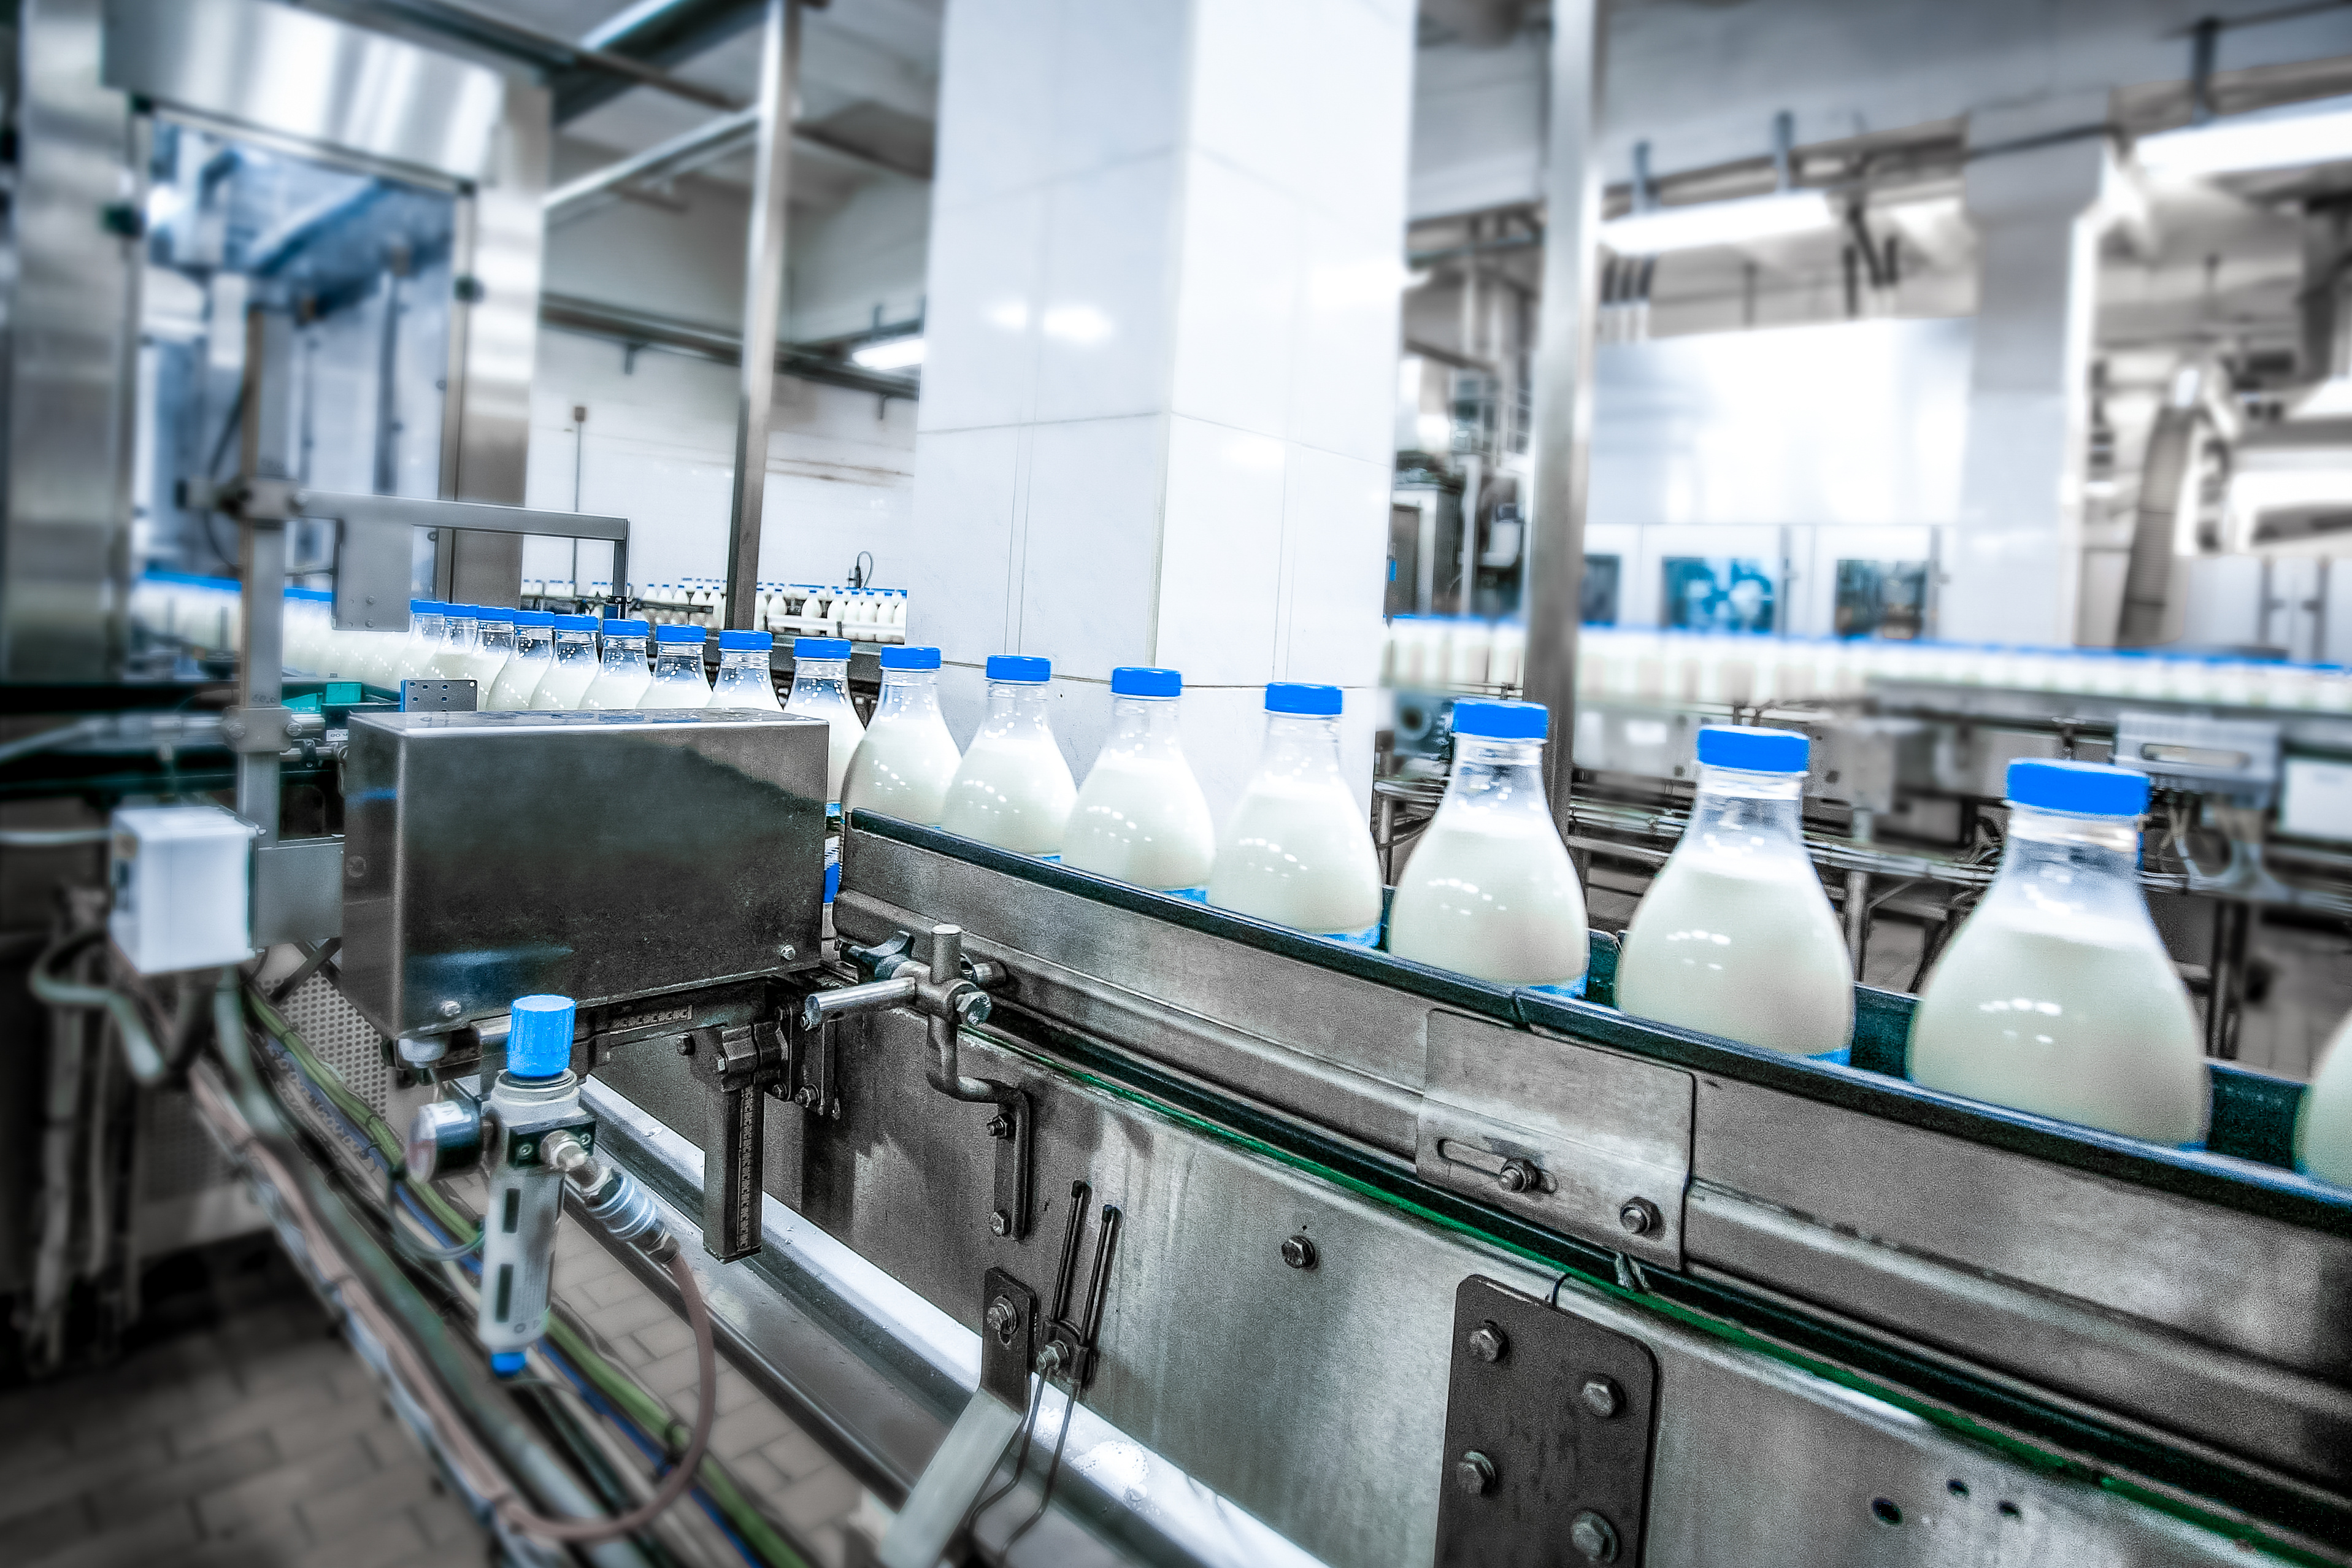 Complete automated line designed for dairy company